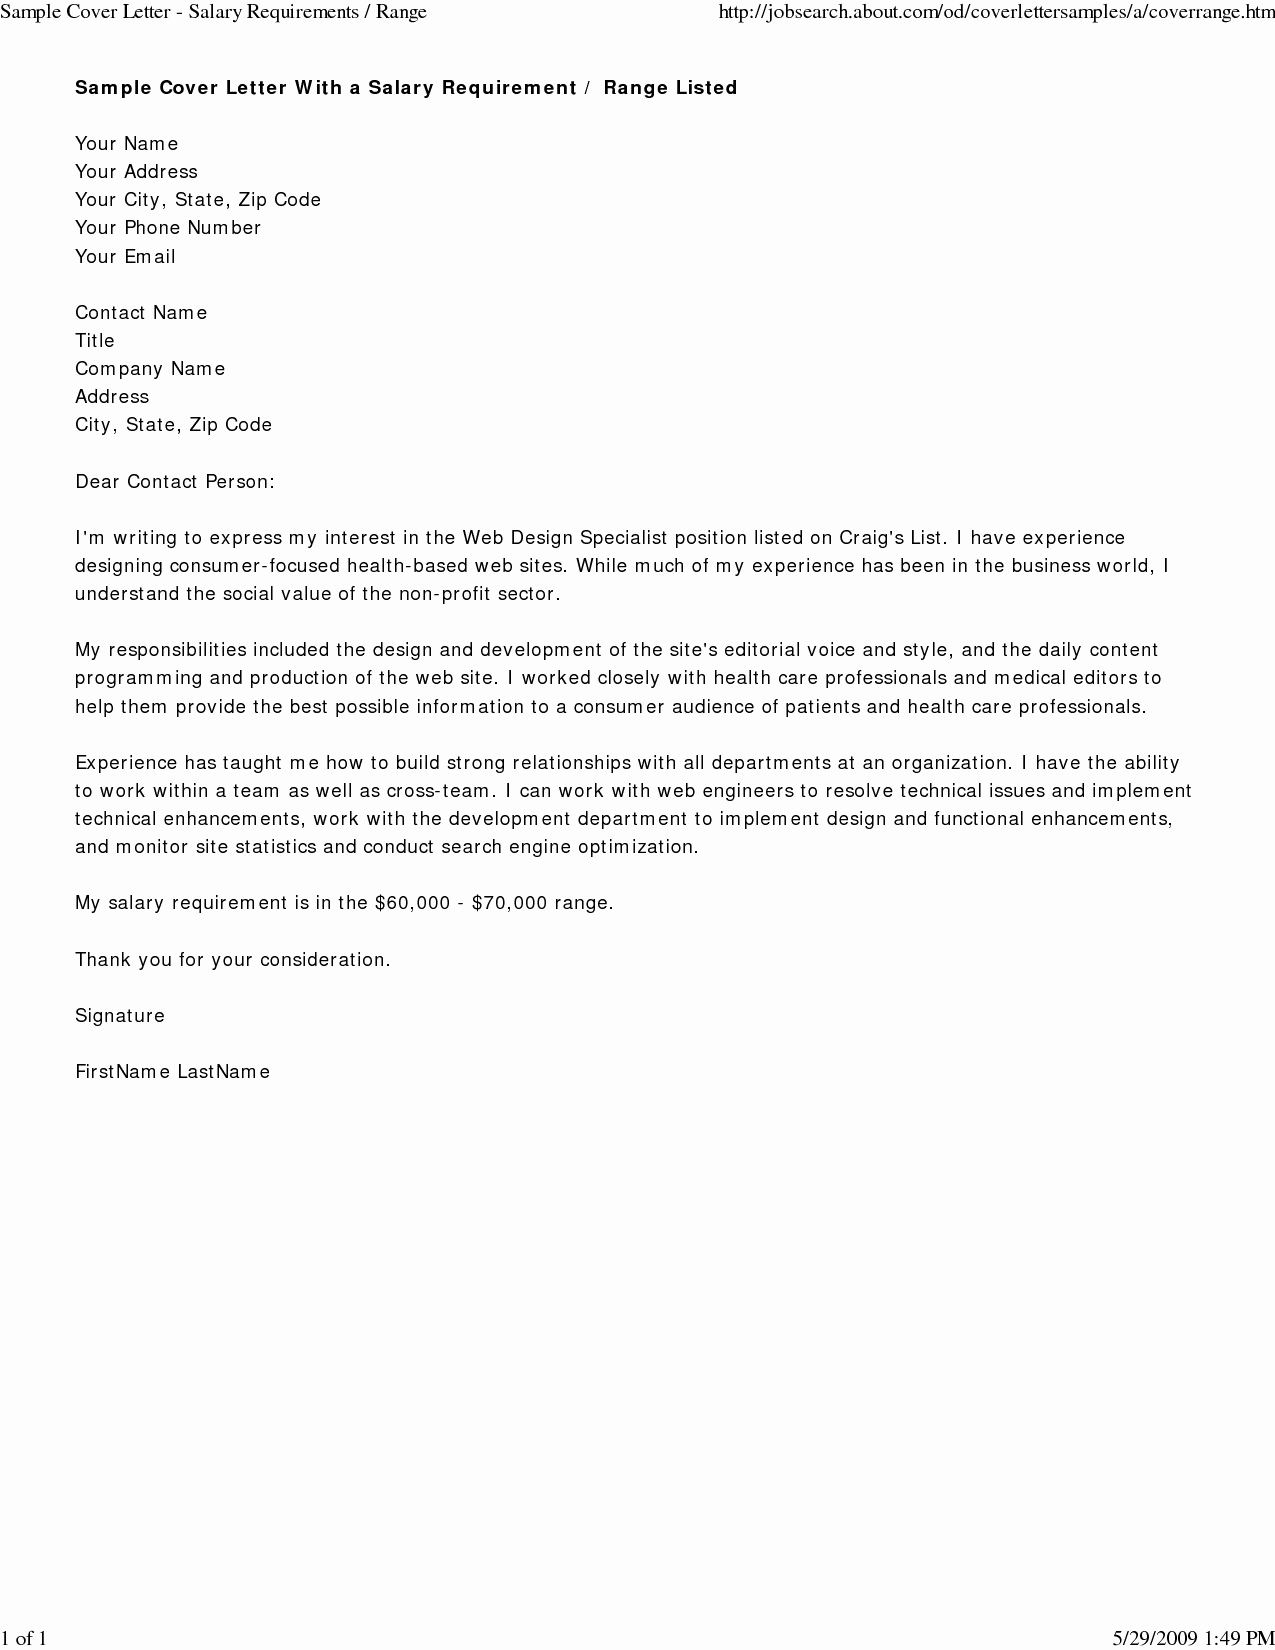 Increase Letter Template - Salary Increase Letter Template Lovely Letter Samples asking for A